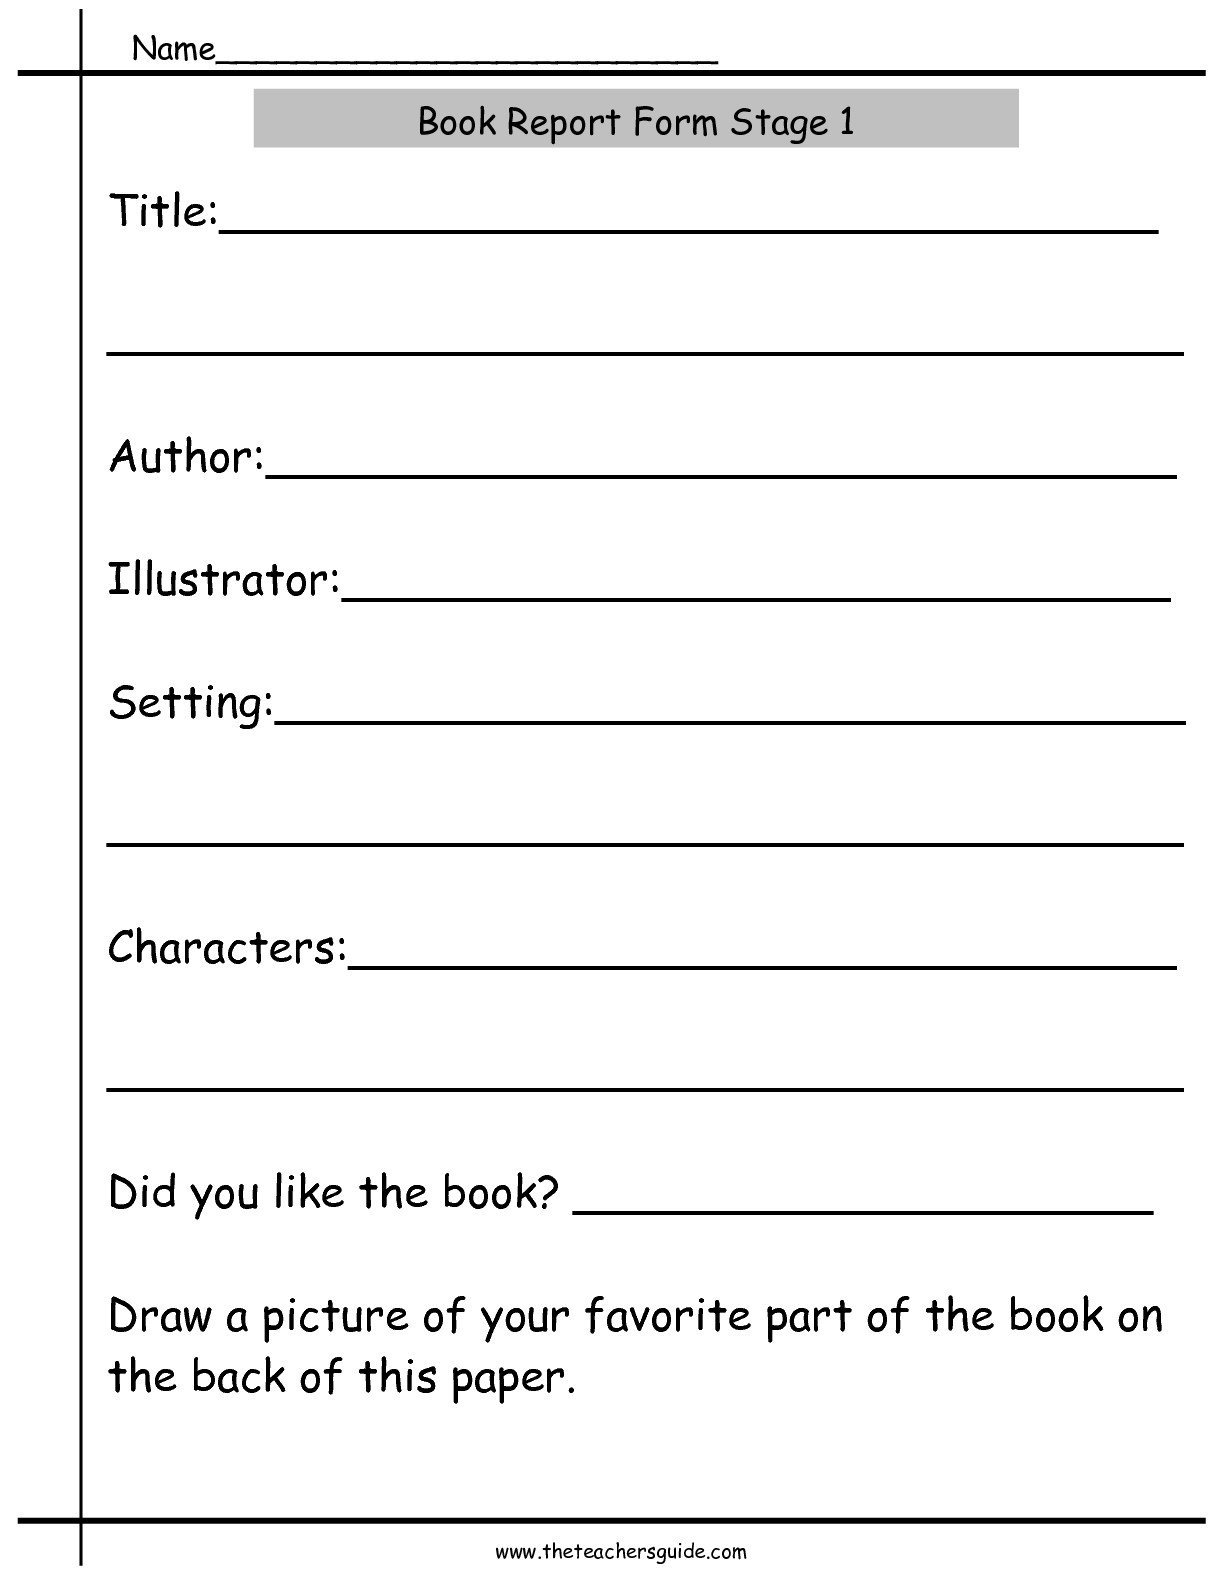 Free Reading Worksheets From The Teacher's Guide With Reading And Questions Worksheets